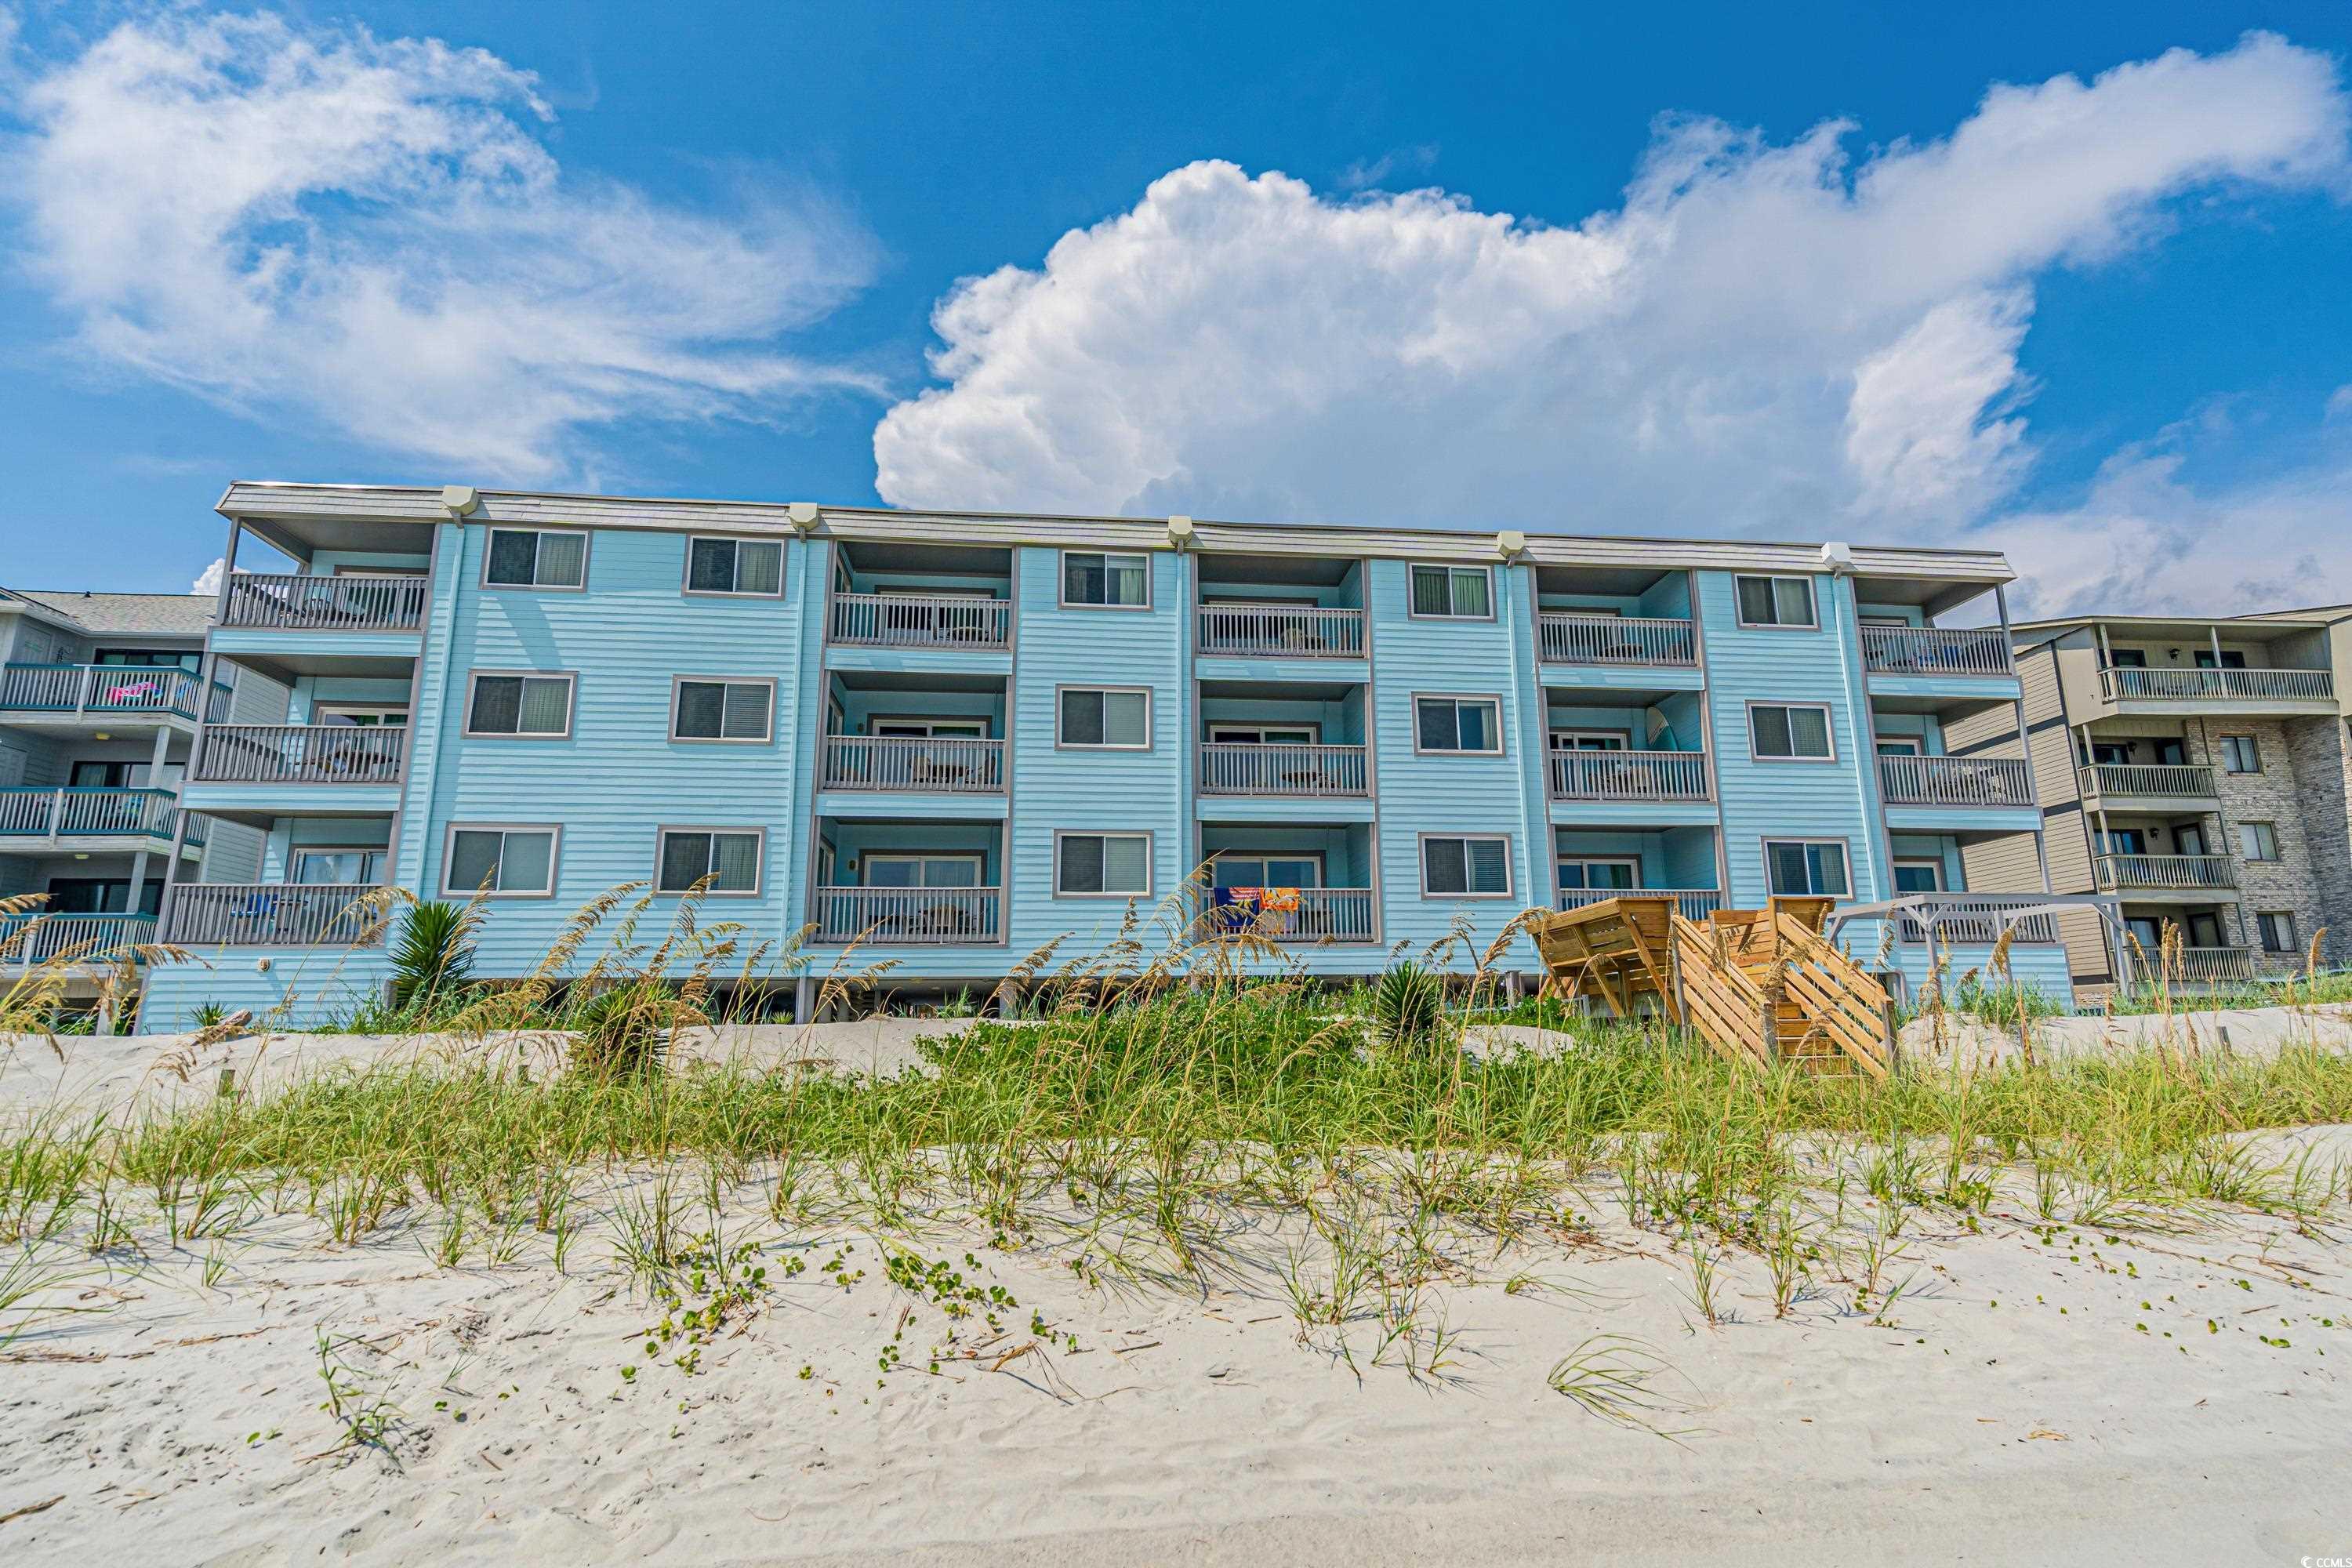 wake up to the soothing sound of the waves and breathtaking views of the atlantic ocean from this stunning second floor 2-bedroom, 2-bathroom condo in the heart of surfside beach. located in the desirable sandpebble beach club, this newly renovated complex offers the perfect combination of luxury, comfort, and coastal living. rare opportunity to buy a condo in this coveted surfside beach area.  whether you're looking for a primary residence, a vacation getaway, or an investment property, this condo offers it all. imagine sipping your morning coffee on the balcony while watching dolphins play in the surf, or taking a leisurely stroll on the sandy beaches just steps away from your front door.  surfside beach is known for its family-friendly atmosphere, and this condo provides the perfect opportunity to create lasting memories with loved ones. don't miss your chance to own a piece of paradise on the south carolina coast!  **key features:  -new roof in 2020 -fully-furnished unit with hotel grade furniture -new hurricane rated sliding glass door-2023 -new doors on the owner's closet-2023 -direct oceanfront views from the balcony -open and spacious living area with natural light and sleeper sofa -updated kitchen with granite countertops and stainless steel appliances -primary suite with ocean views and ensuite bathroom -second bedroom with twin beds at the front of the unit -private balcony to enjoy sunrise and ocean breezes -in-unit washer and dryer -elevator access for convenience -community hot tub  -private access to the beach -close proximity to dining, shopping, and entertainment  key complex features:  -new grilling area-2023 -new exterior paint-2023 -new stairwells-2023 -refinished and coated first floor concrete under the building -new fencing around the property  schedule a showing today and experience the beachfront lifestyle you've always dreamed of. your coastal oasis awaits!